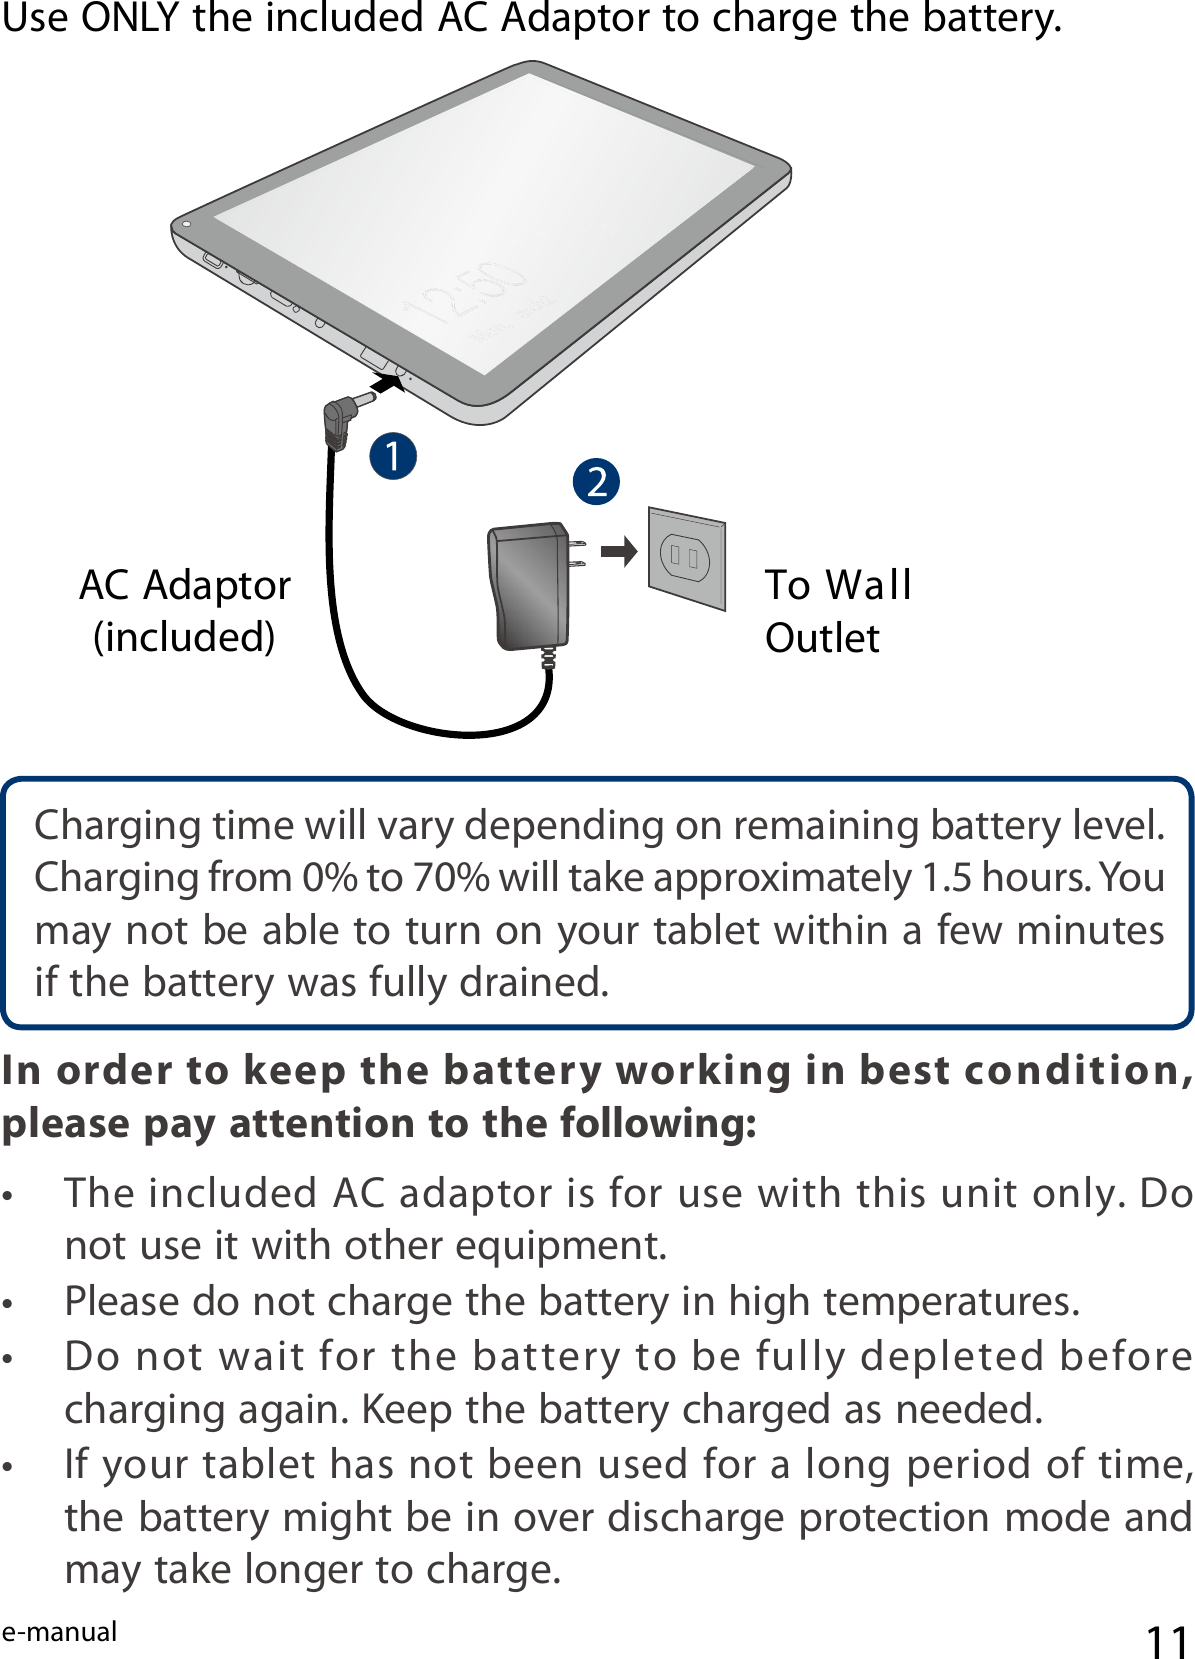 e-manual 11Use ONLY the included AC Adaptor to charge the battery.AC Adaptor(included) Charging time will vary depending on remaining battery level. Charging from 0% to 70% will take approximately 1.5 hours. You may not be able to turn on your tablet within a few minutes if the battery was fully drained.In order to keep the battery working in best condition, please pay attention to the following:•  The included AC adaptor is for use with this unit only. Do not use it with other equipment.•  Please do not charge the battery in high temperatures.•  Do not  wait for  the battery  to  be fully  depleted  before charging again. Keep the battery charged as needed.•  If your tablet has not been used for a long period of time, the battery might be in over discharge protection mode and may take longer to charge.To Wall Outlet